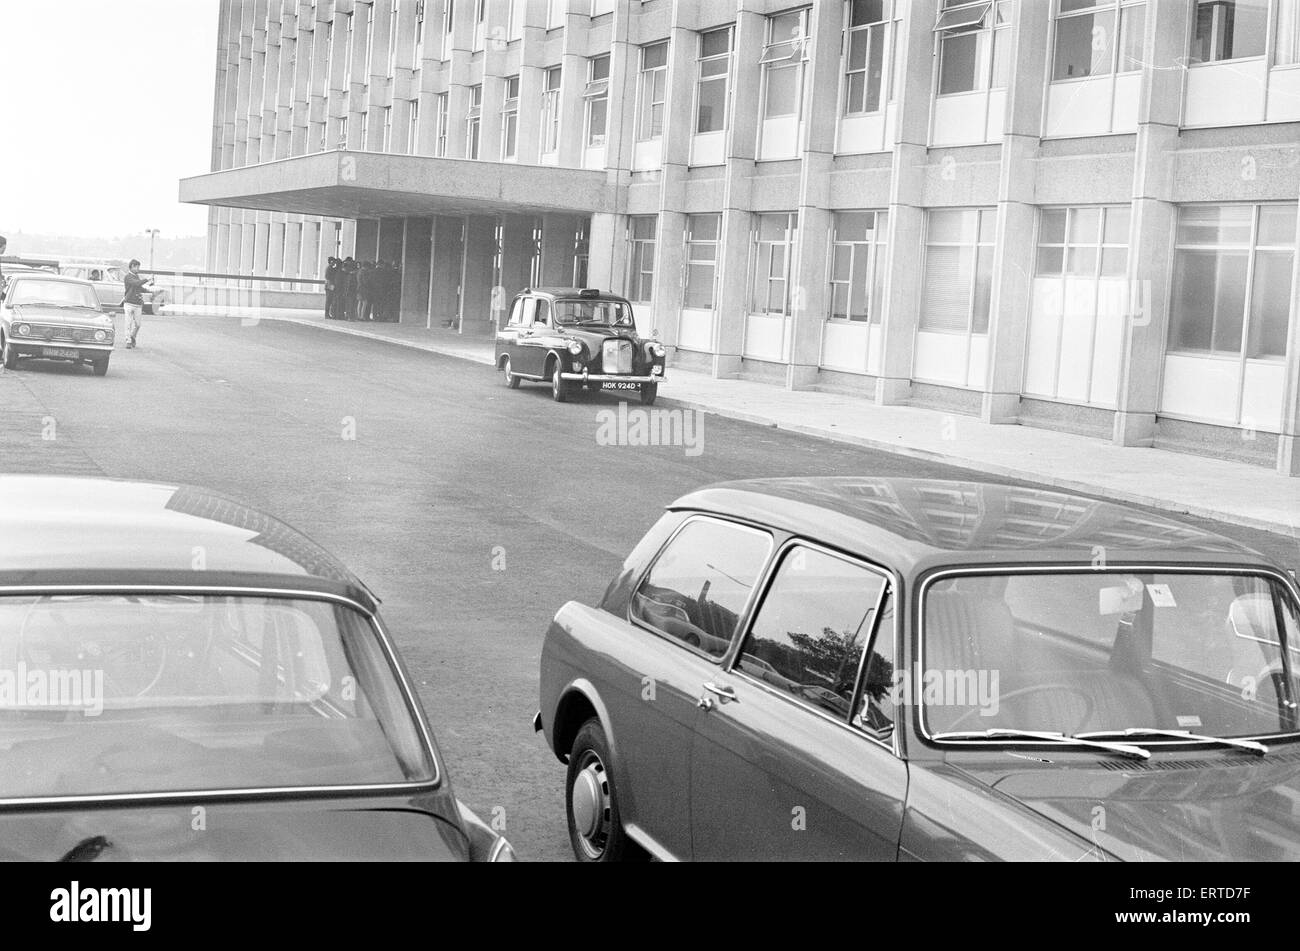 irmingham Maternity Hospital, 3rd October 1968. It was reported yesterday, that Sheila Thorns from Birmingham underwent a Caesarean section early this morning during which six children - four boys and two girls - were delivered. In what was been hailed as the first recorded case of live sextuplets in Britain. All the babies were placed in incubators after being delivered. Twenty eight medical staff from Birmingham Maternity Hospital were present at the delivery. Three of the Thorns sextuplets survived, July, Susan & Roger, and went on to live healthy lives. Stock Photo